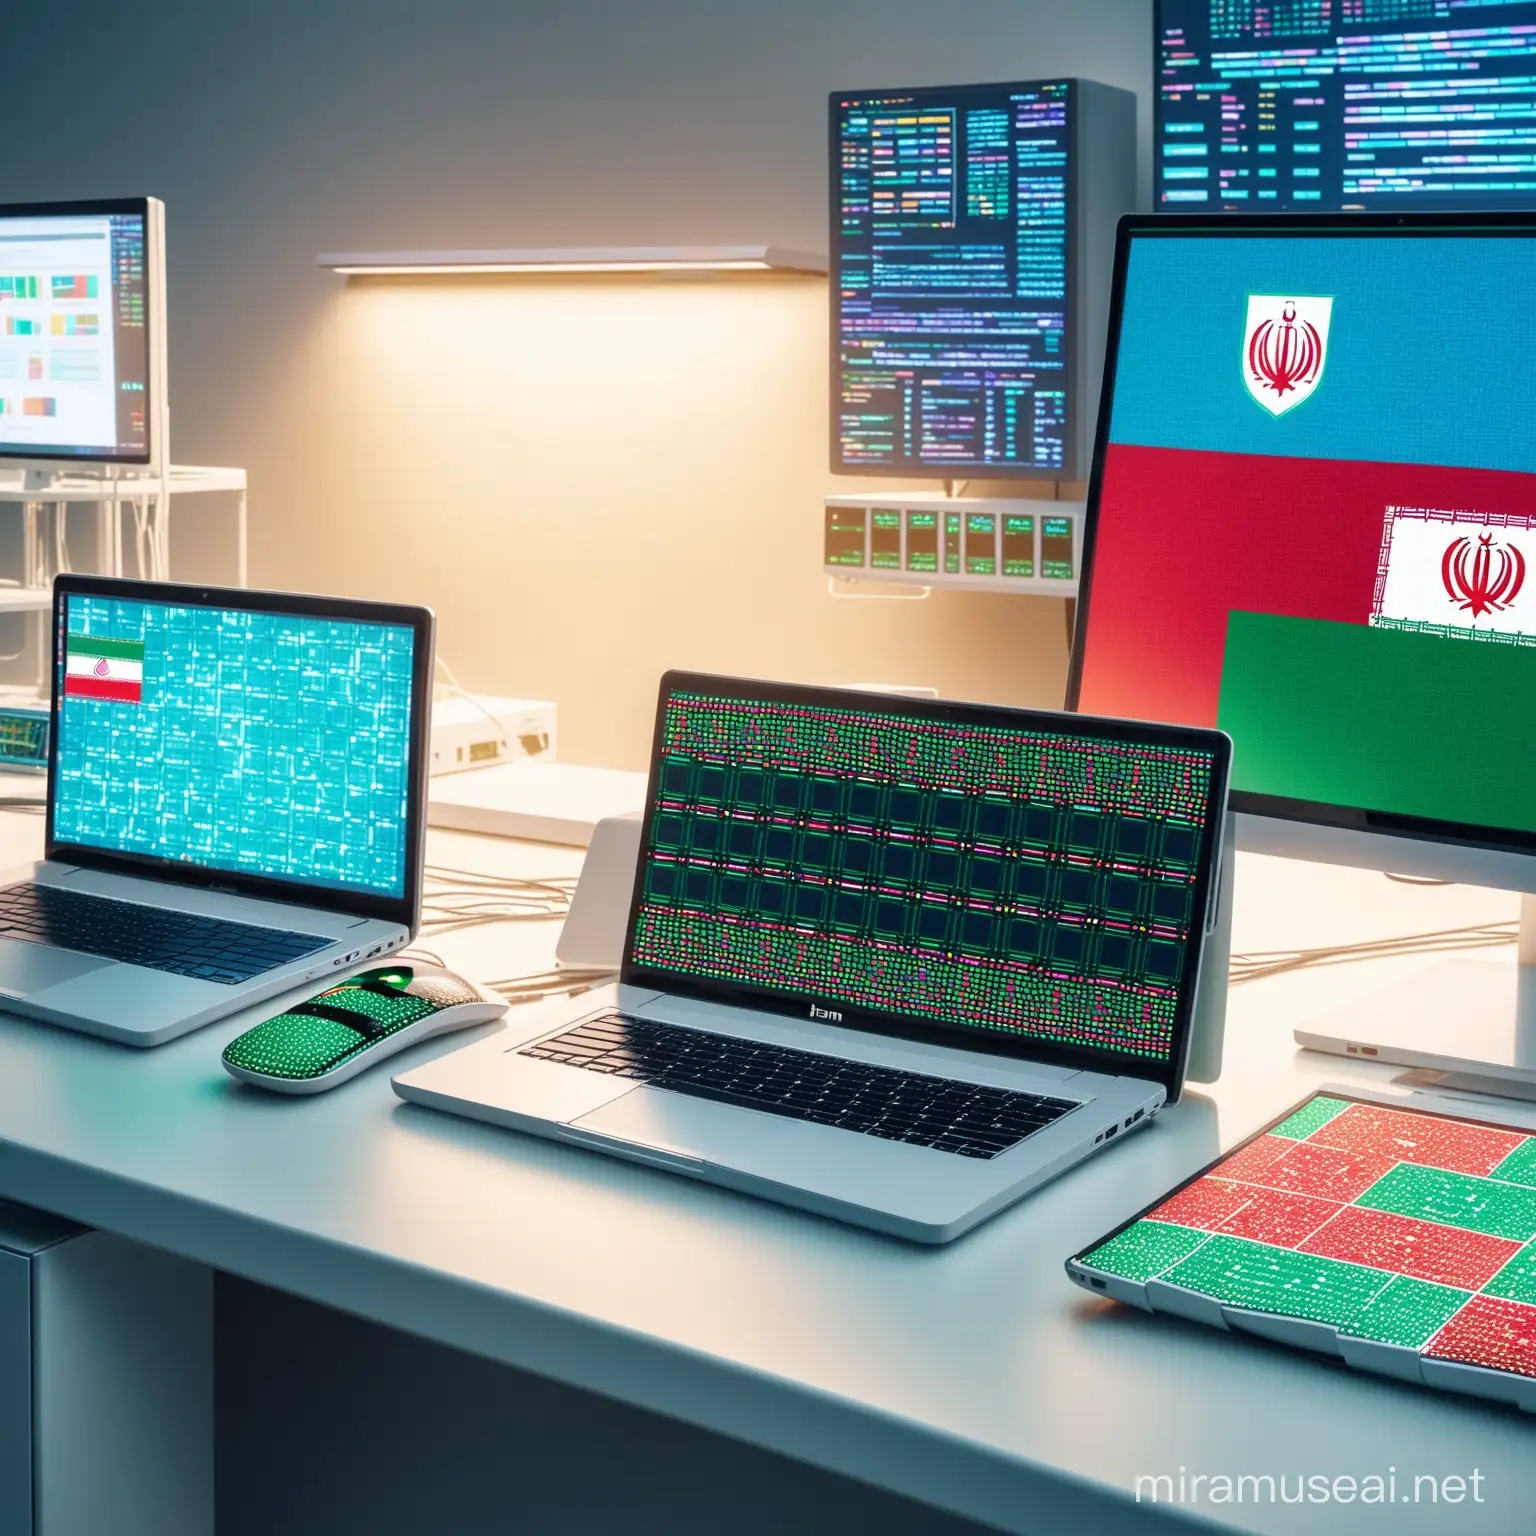 A super modern Nano technology laboratory with screens and laptop which is showing Nano Chips on laptop screen.
Flag of Iran and Persian designs.